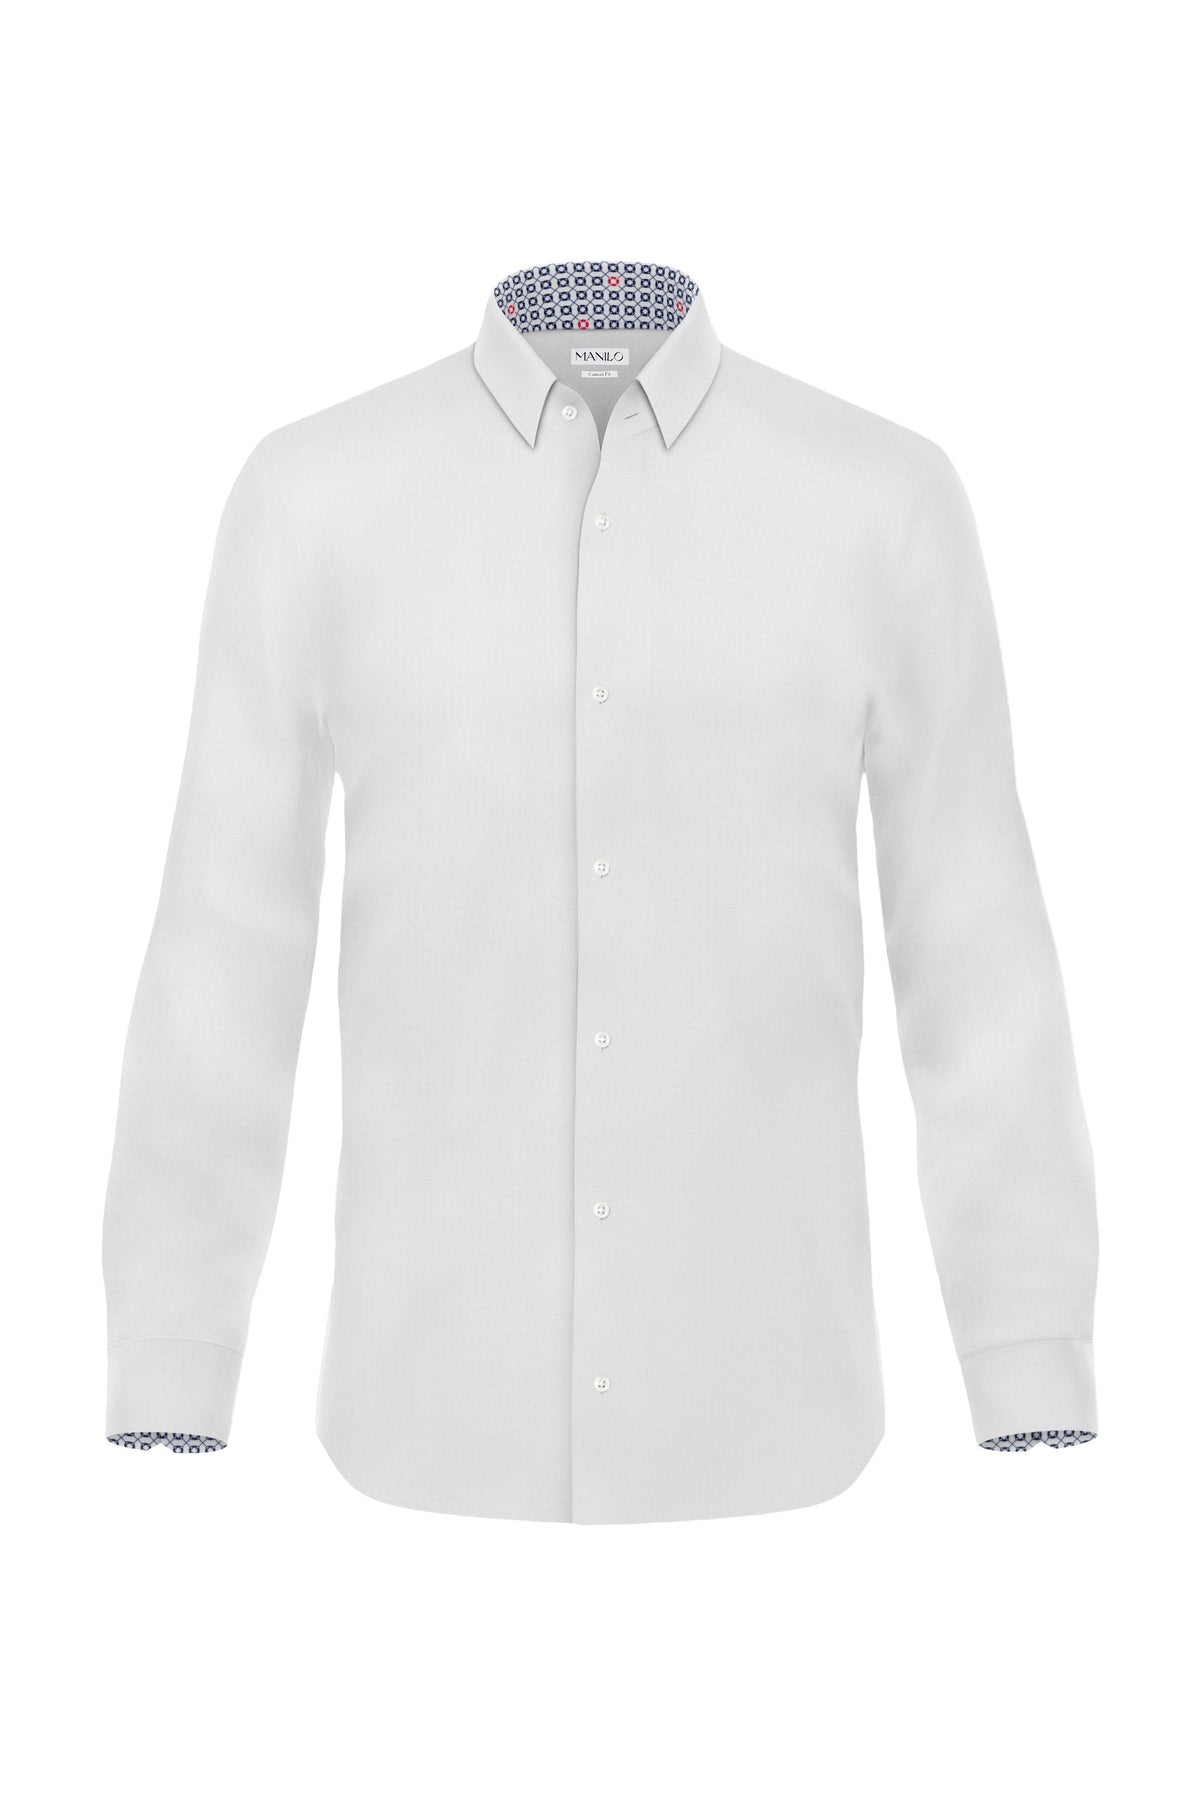 Casual shirt with summery print pattern in collar and cuff in white (Art. 2251-C)